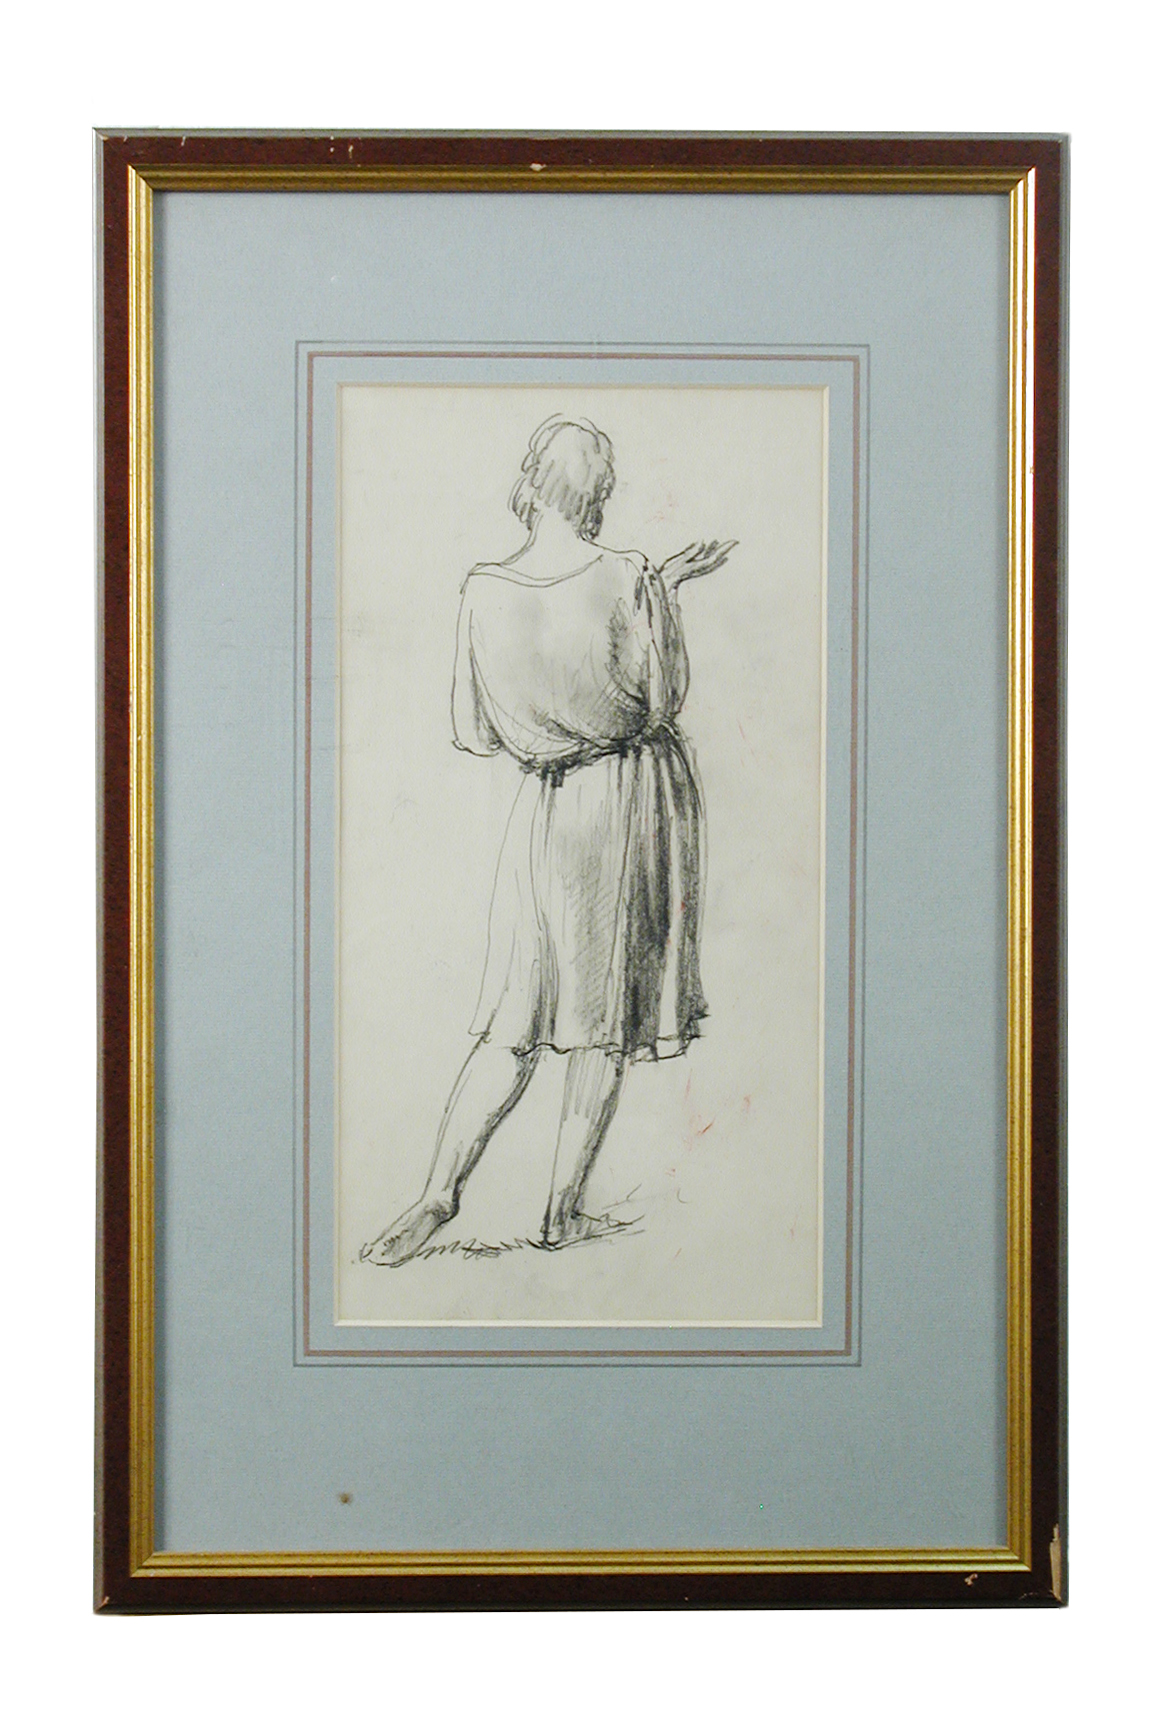 William Dring, RA (British, 1904-1990) 'Two pencil studies of standing females', one signed and